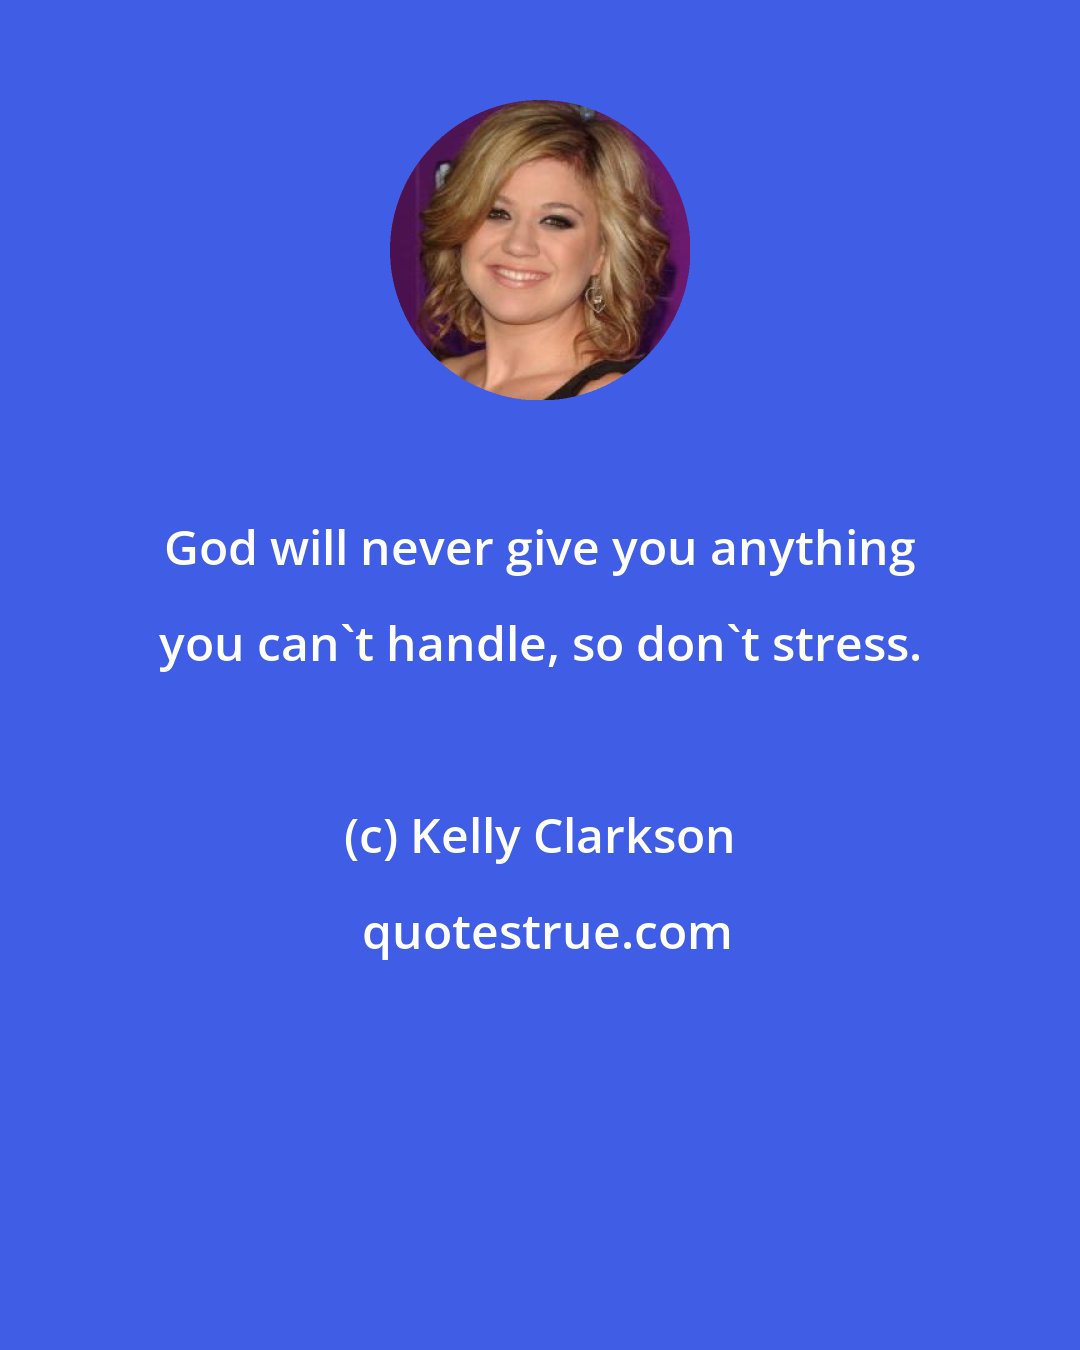 Kelly Clarkson: God will never give you anything you can't handle, so don't stress.